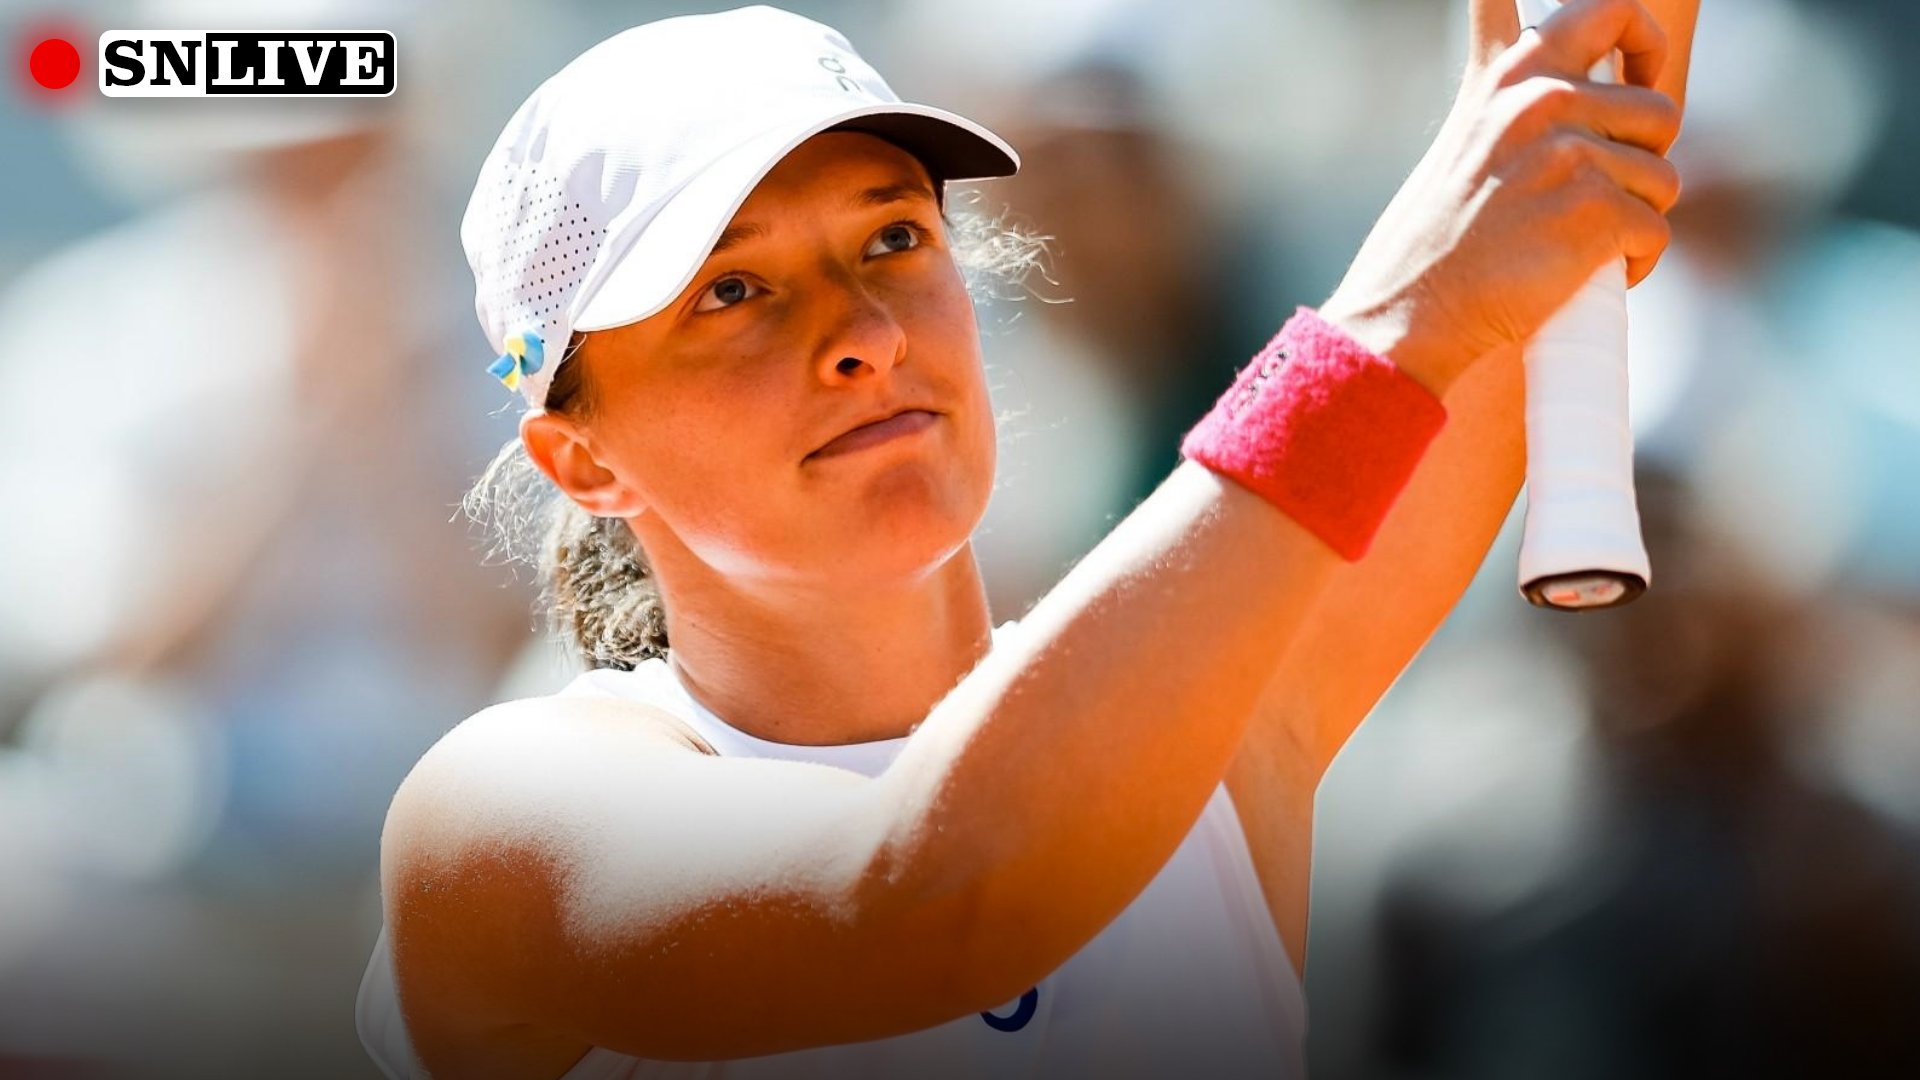 Iga Swiatek vs Beatriz Haddad Maia live score, updates, highlights and result from French Open 2023 semi final